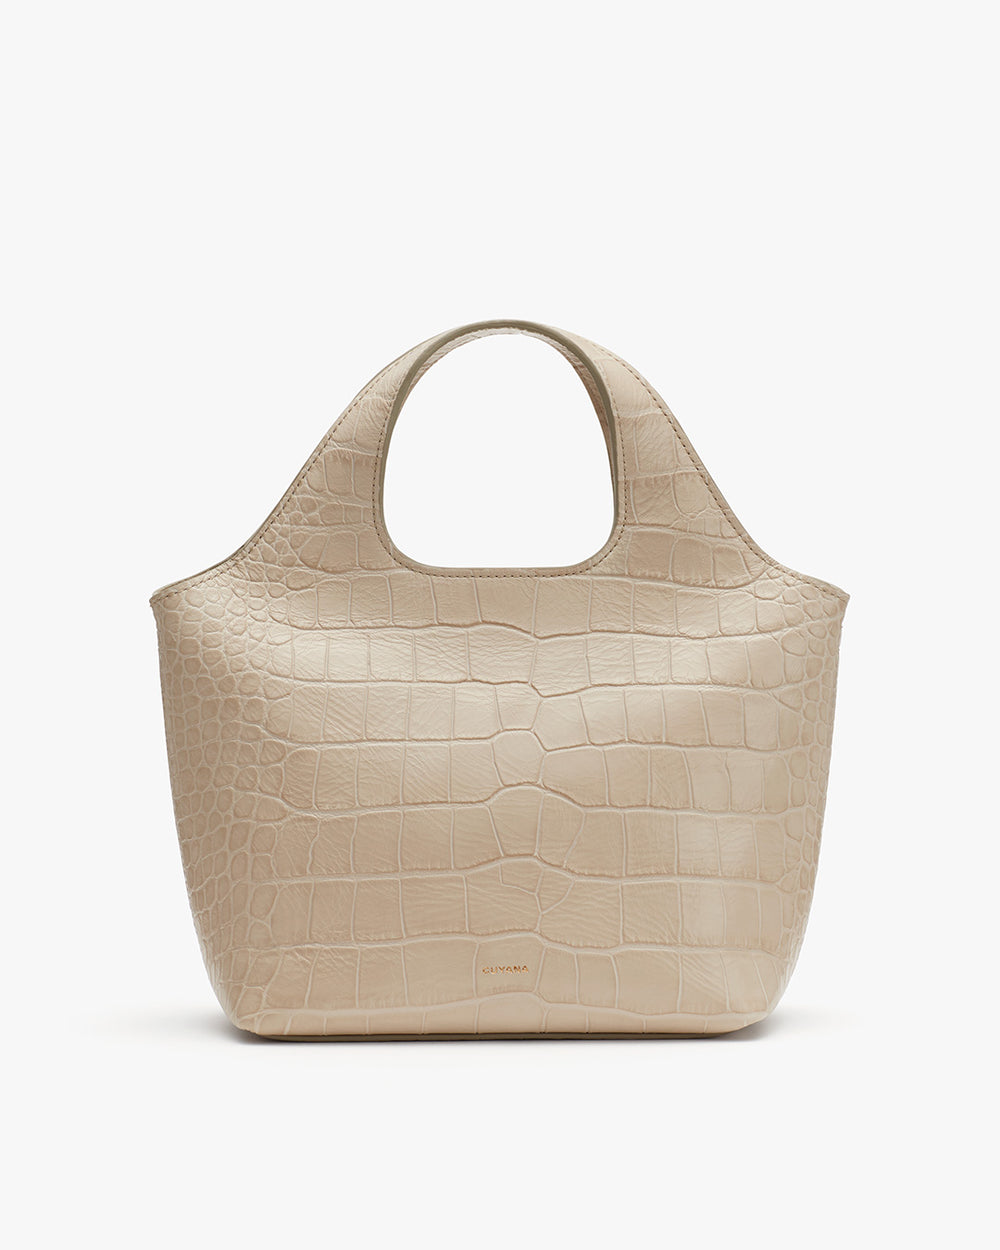 Handbag with top handle and embossed texture